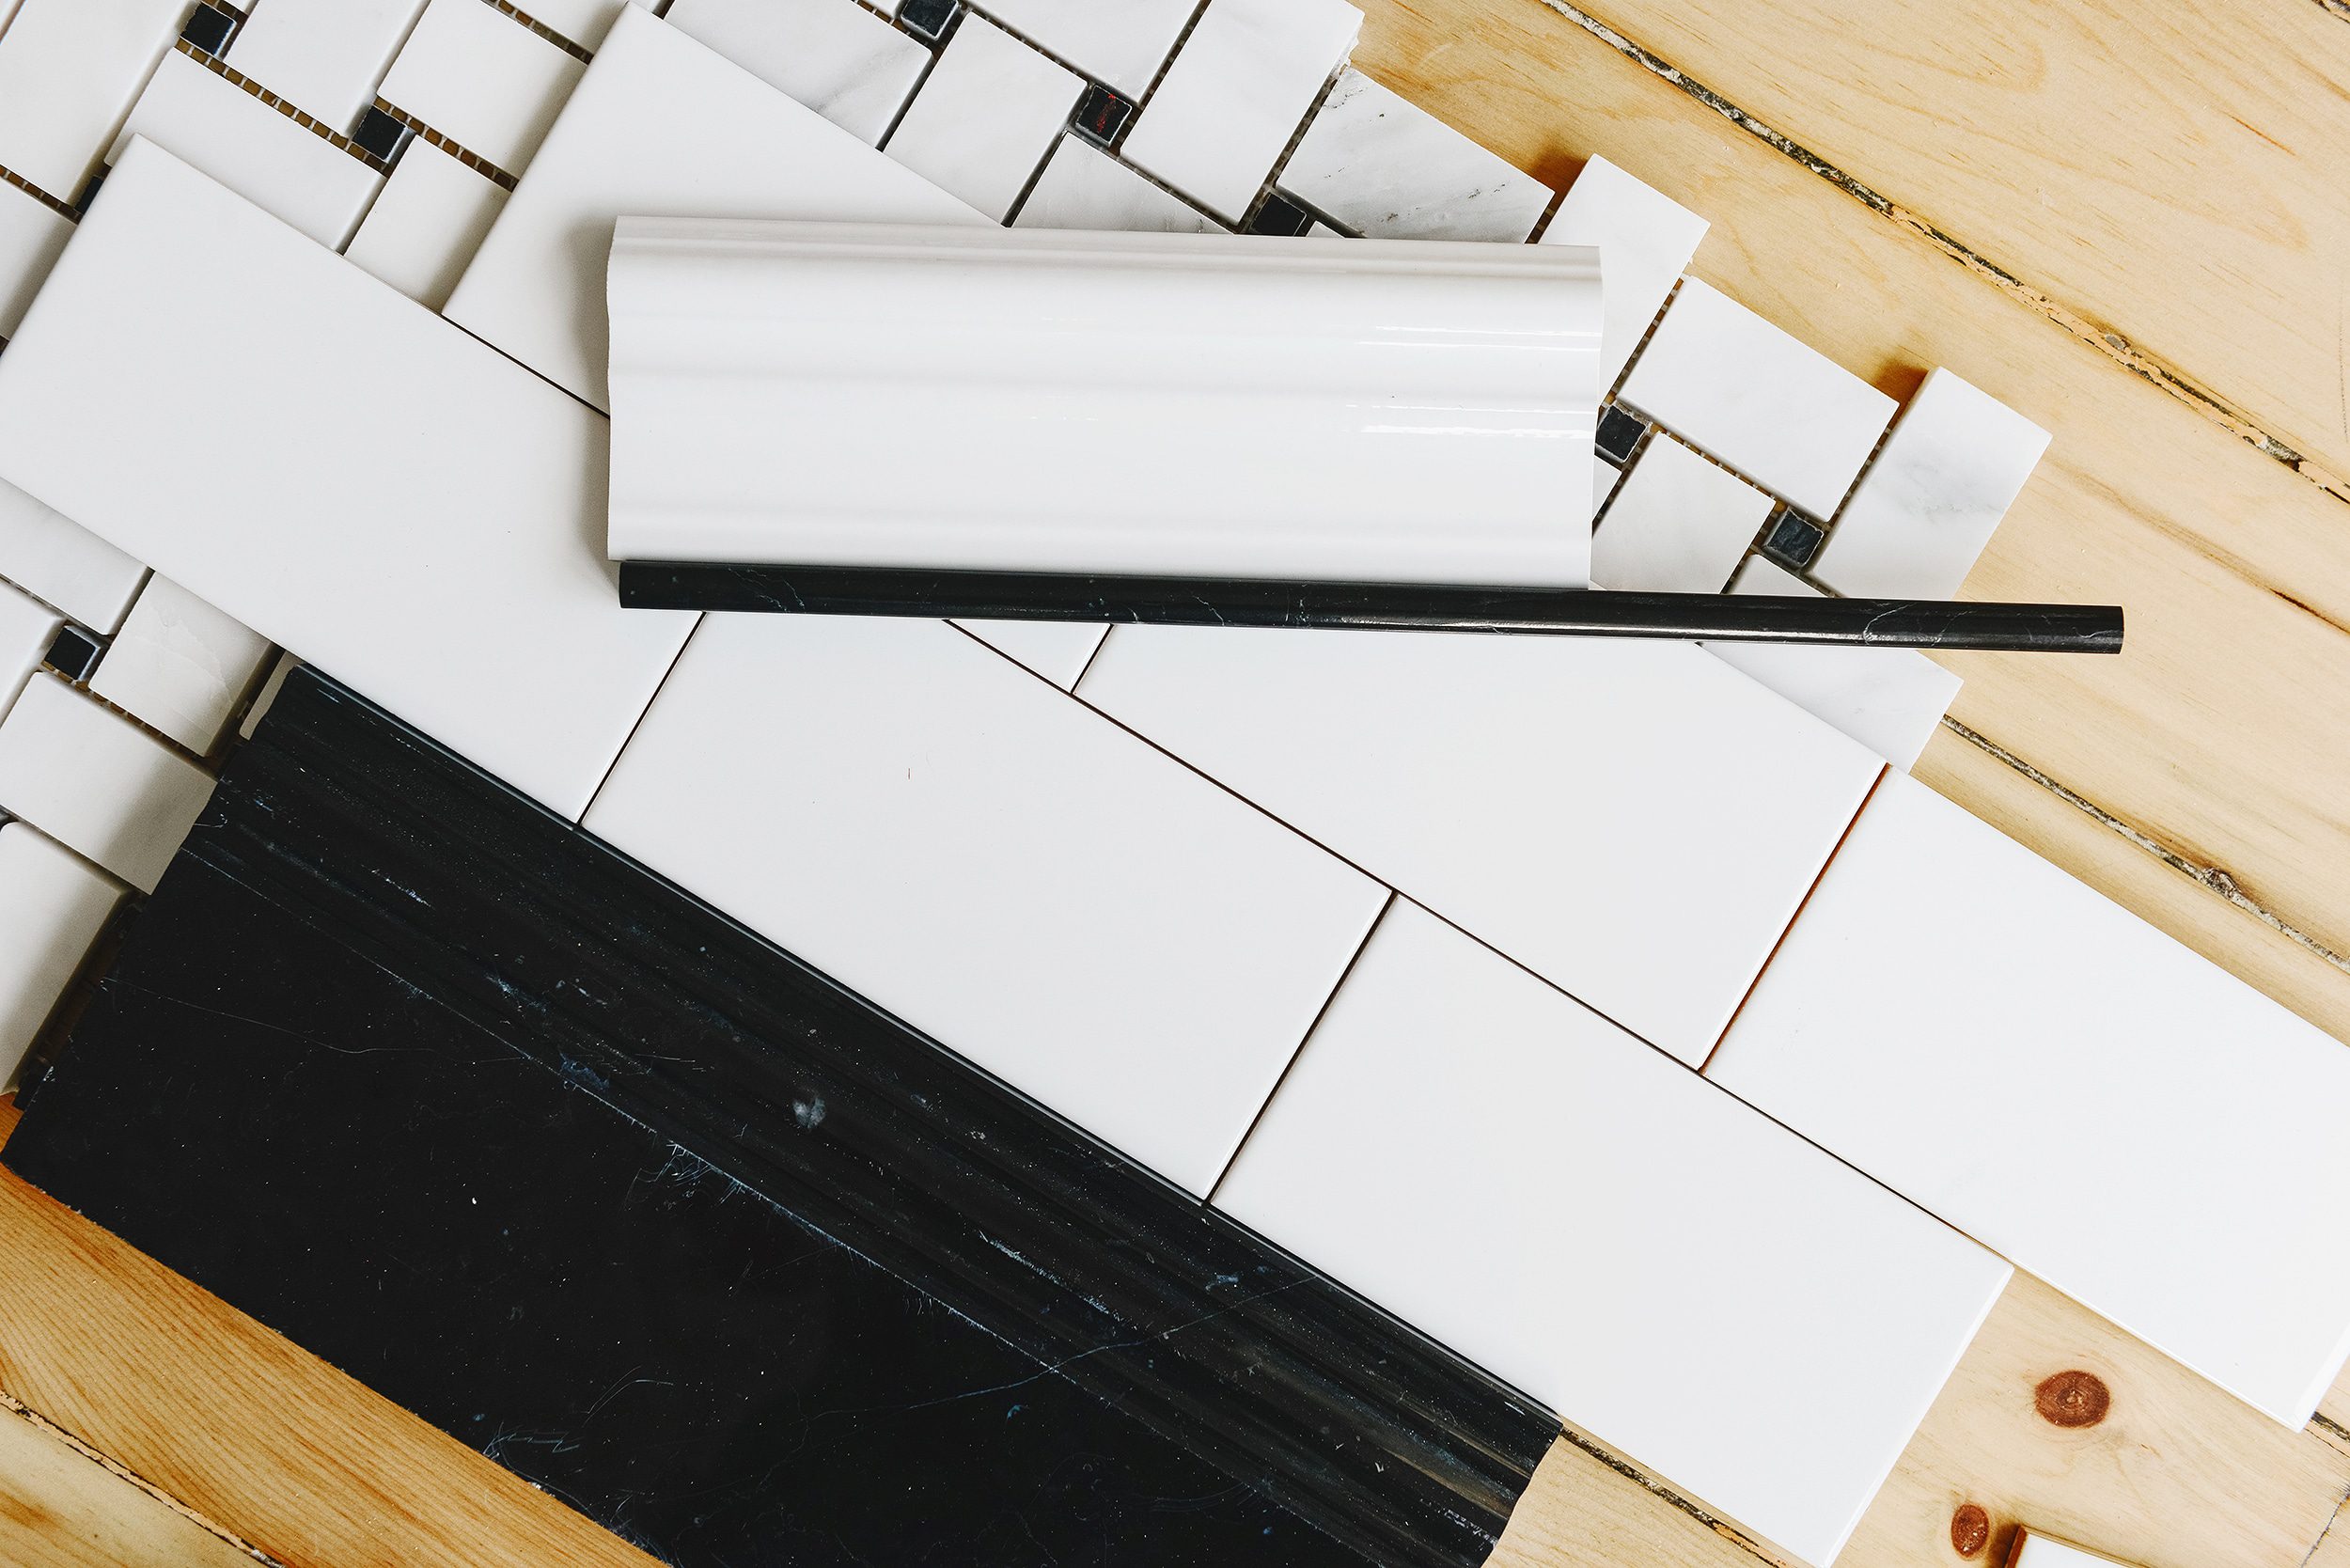 Classic black and white tile with basketweave floor tile that we'll be using in our Two Flat renovation | via Yellow Brick Home